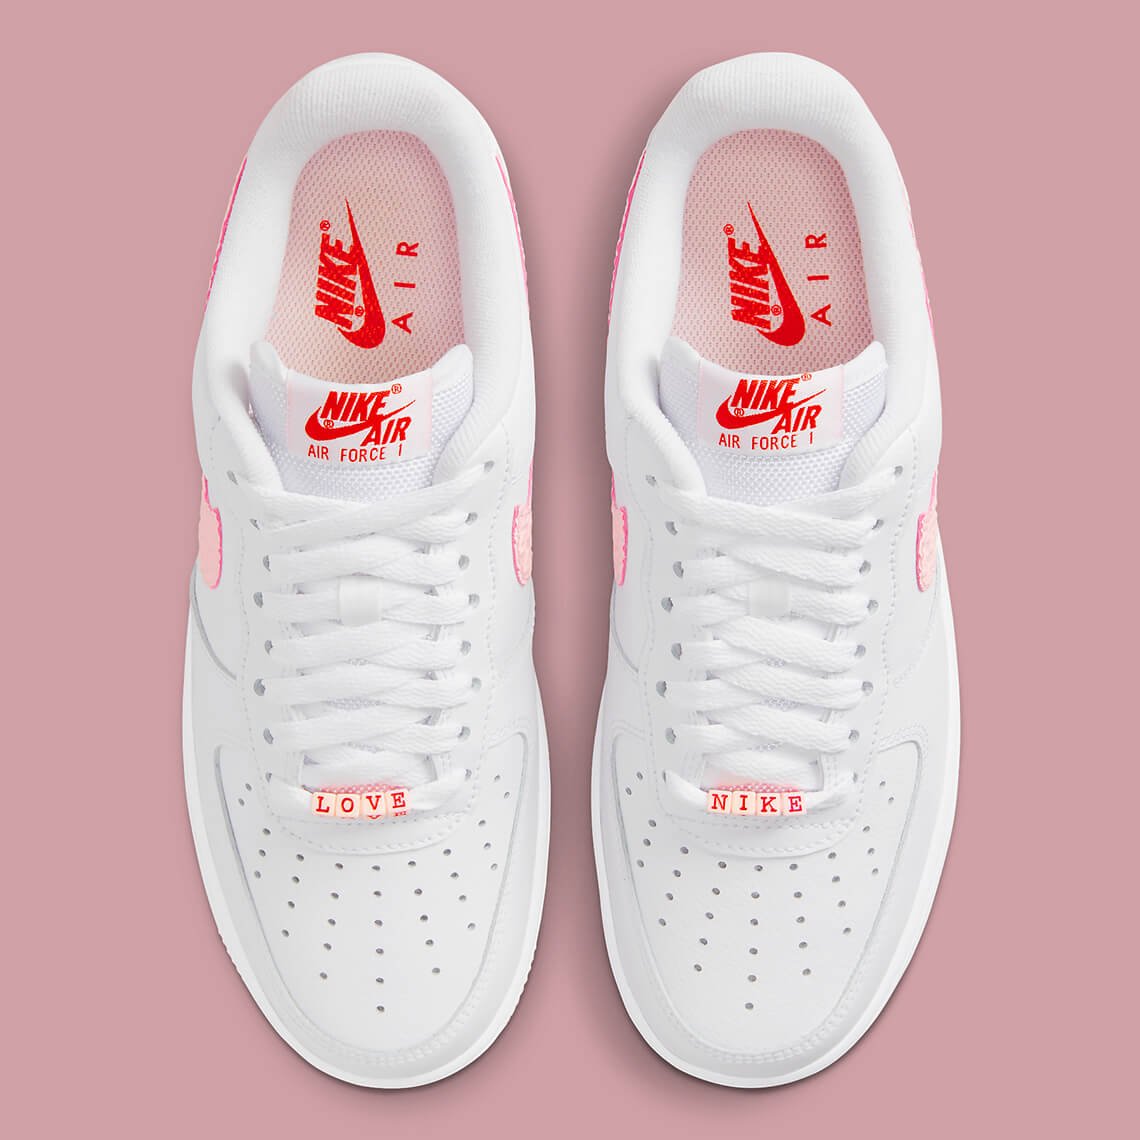 CNK-Nike-Air-Force-1-Valentines-Day-top.jpeg